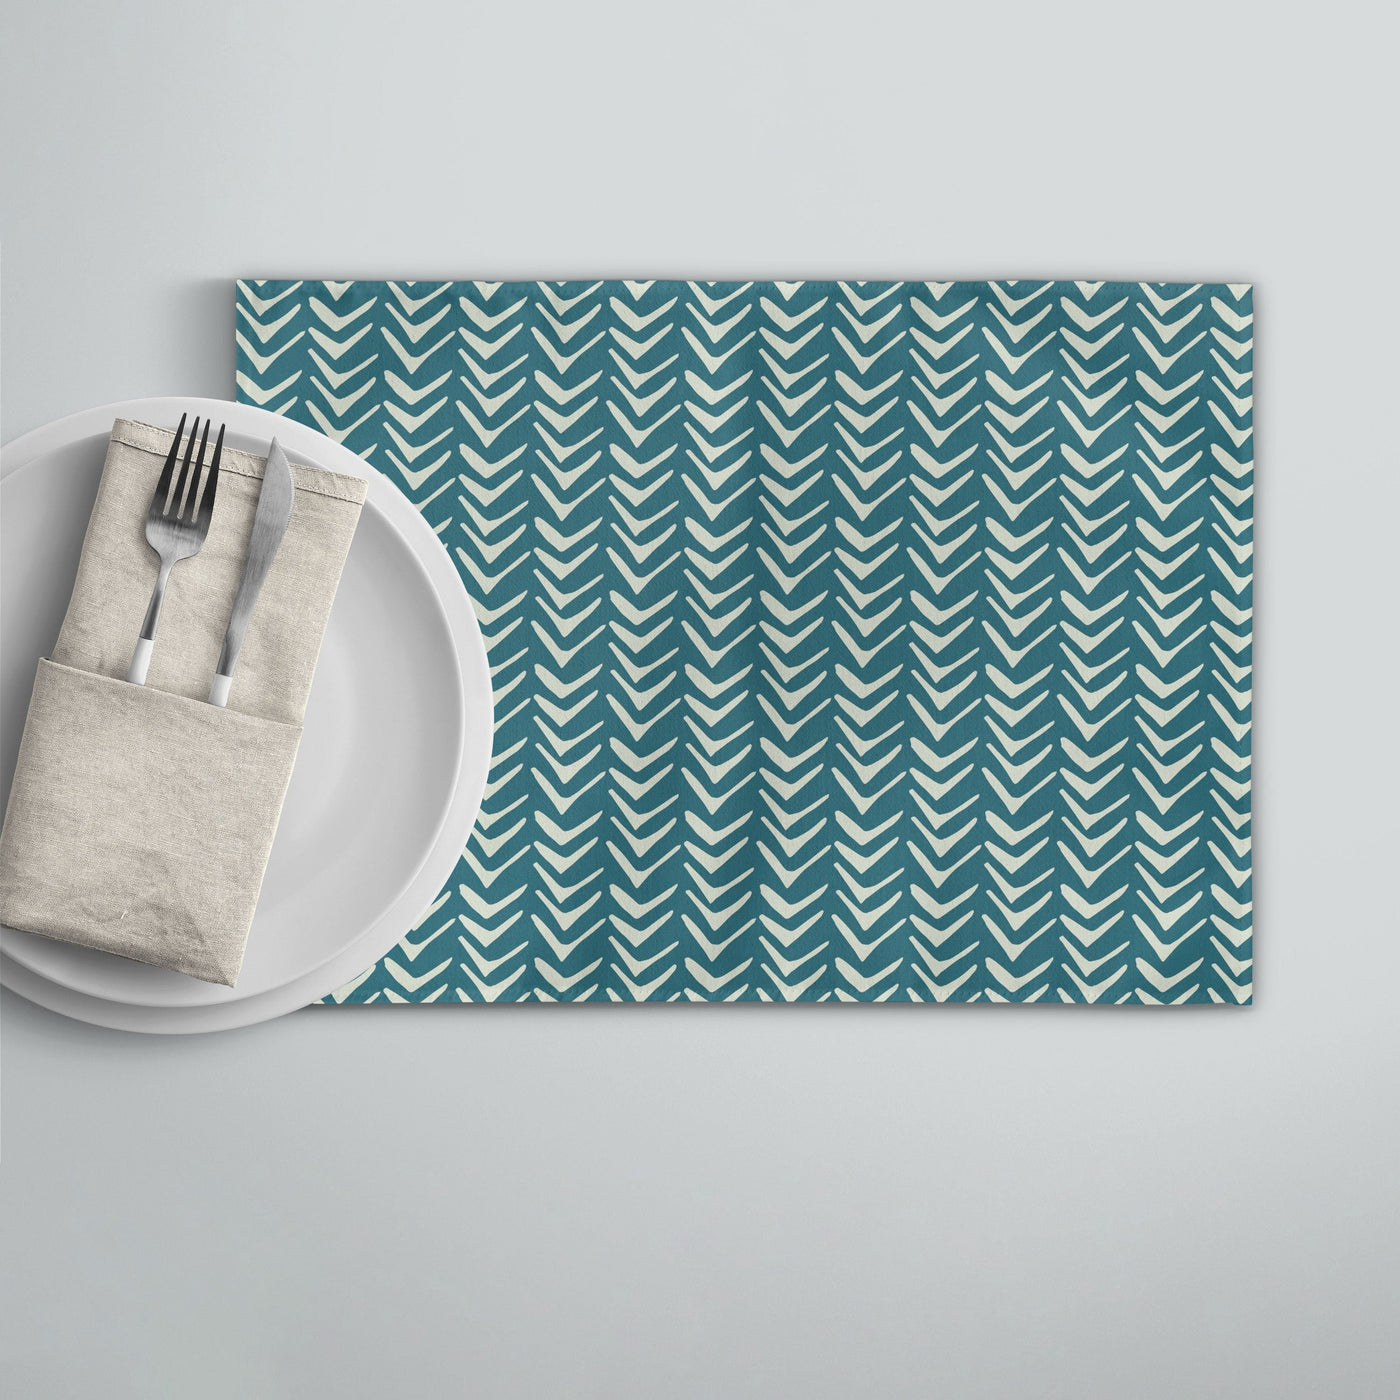 Teal Tribal Chevron Placemat | Sam + Zoey Home Basics Sam + Zoey